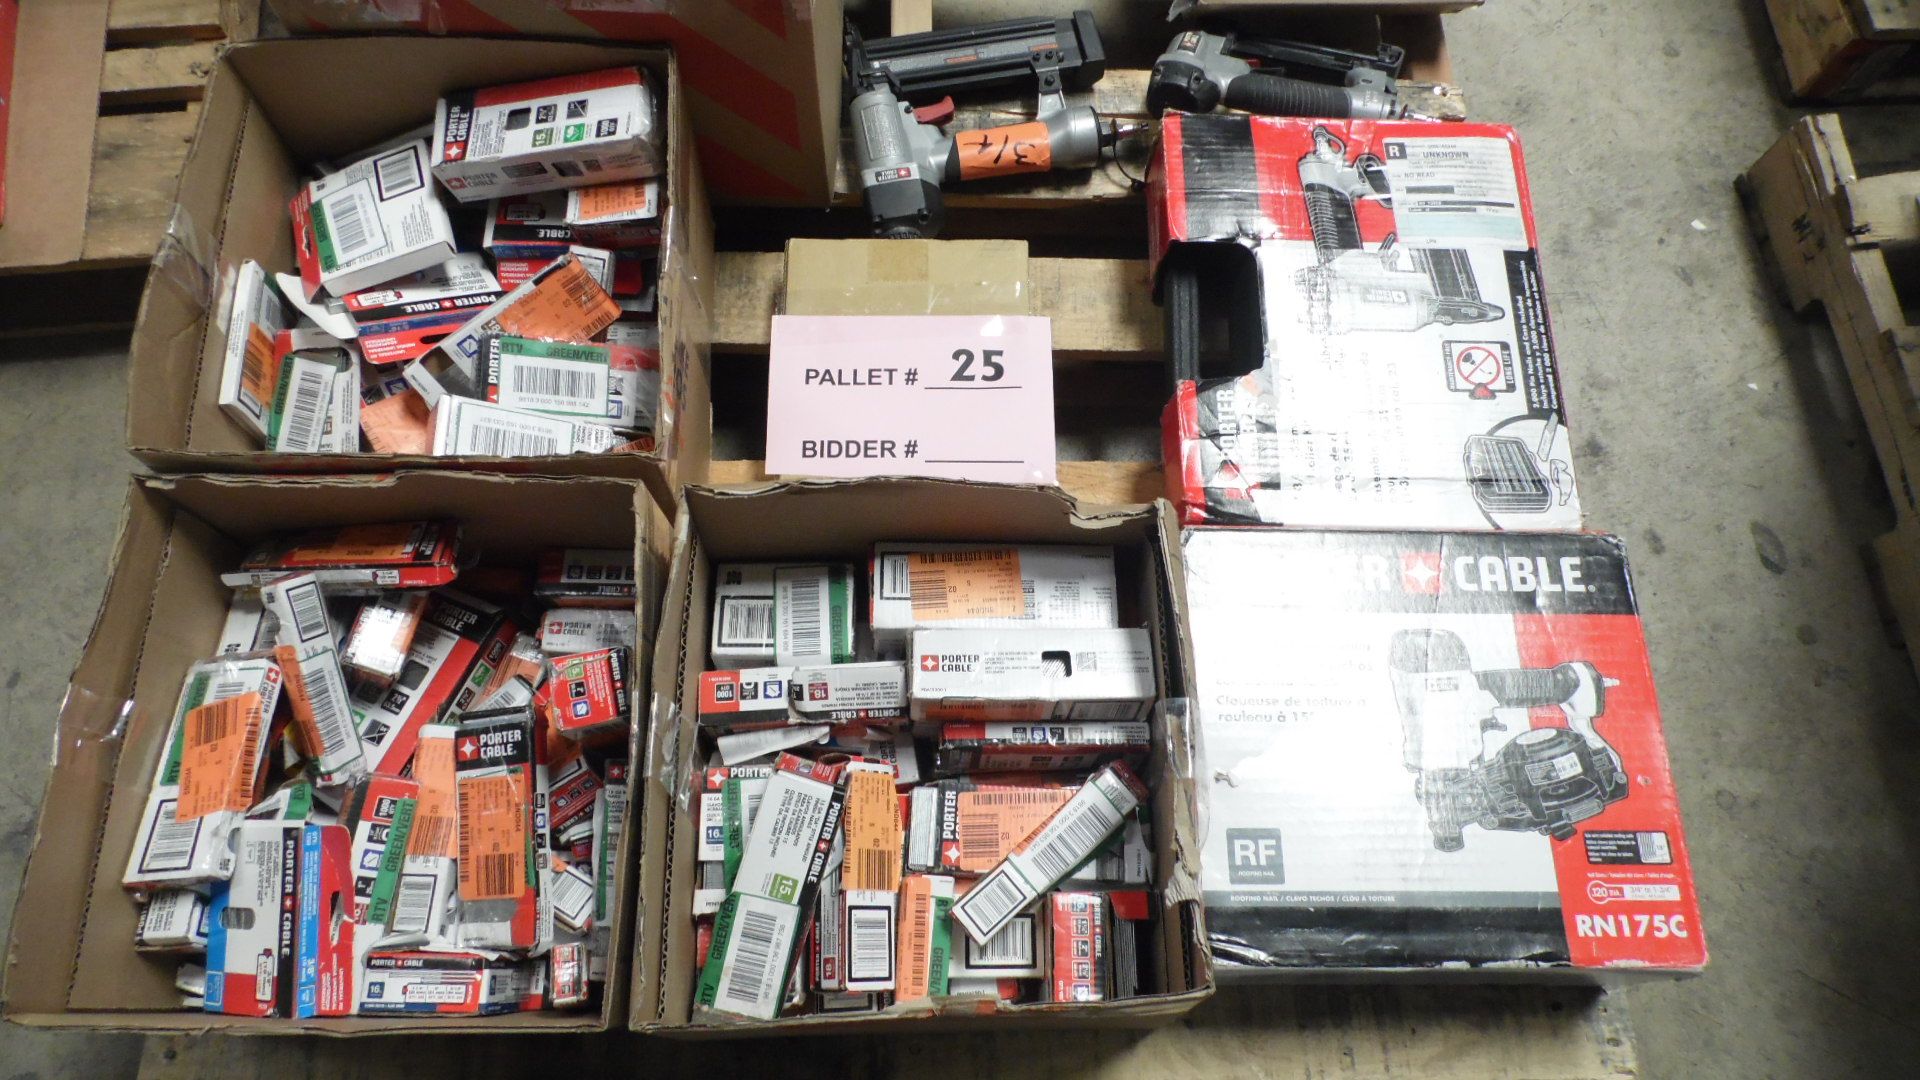 NAILERS, BOXES OF STAPLES